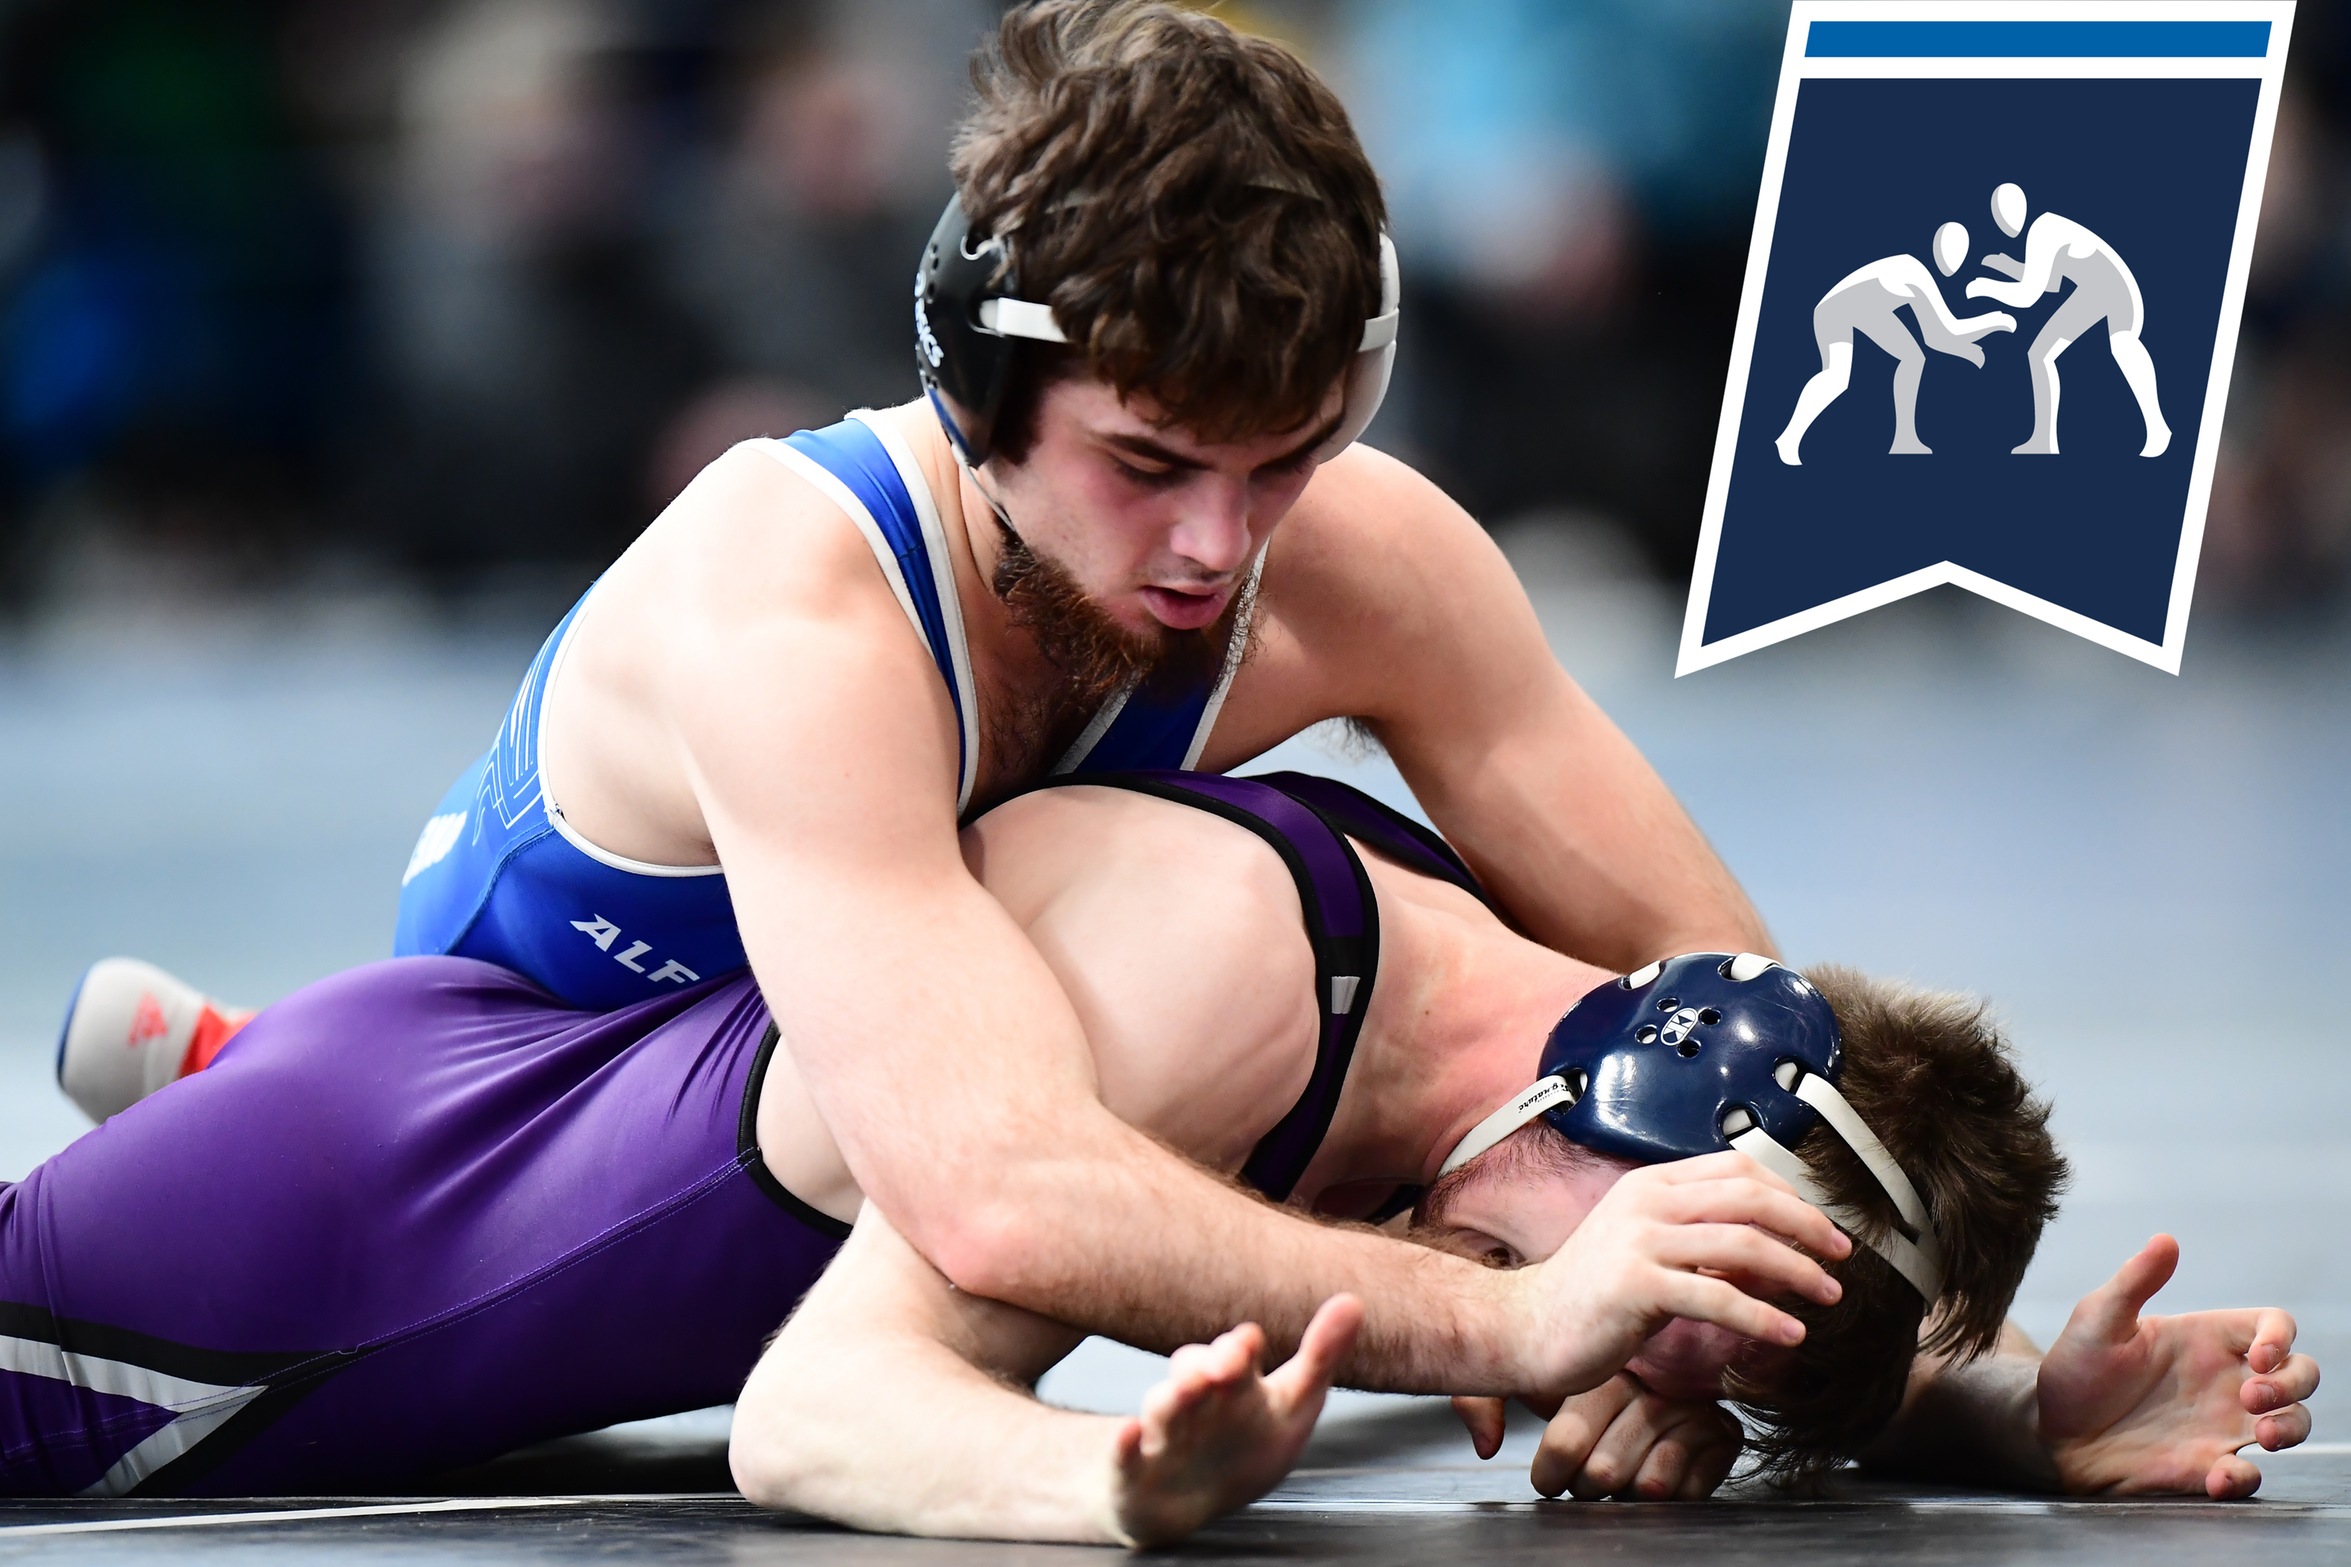 Peterson and Galton Advance at NCAA Mideast Regionals